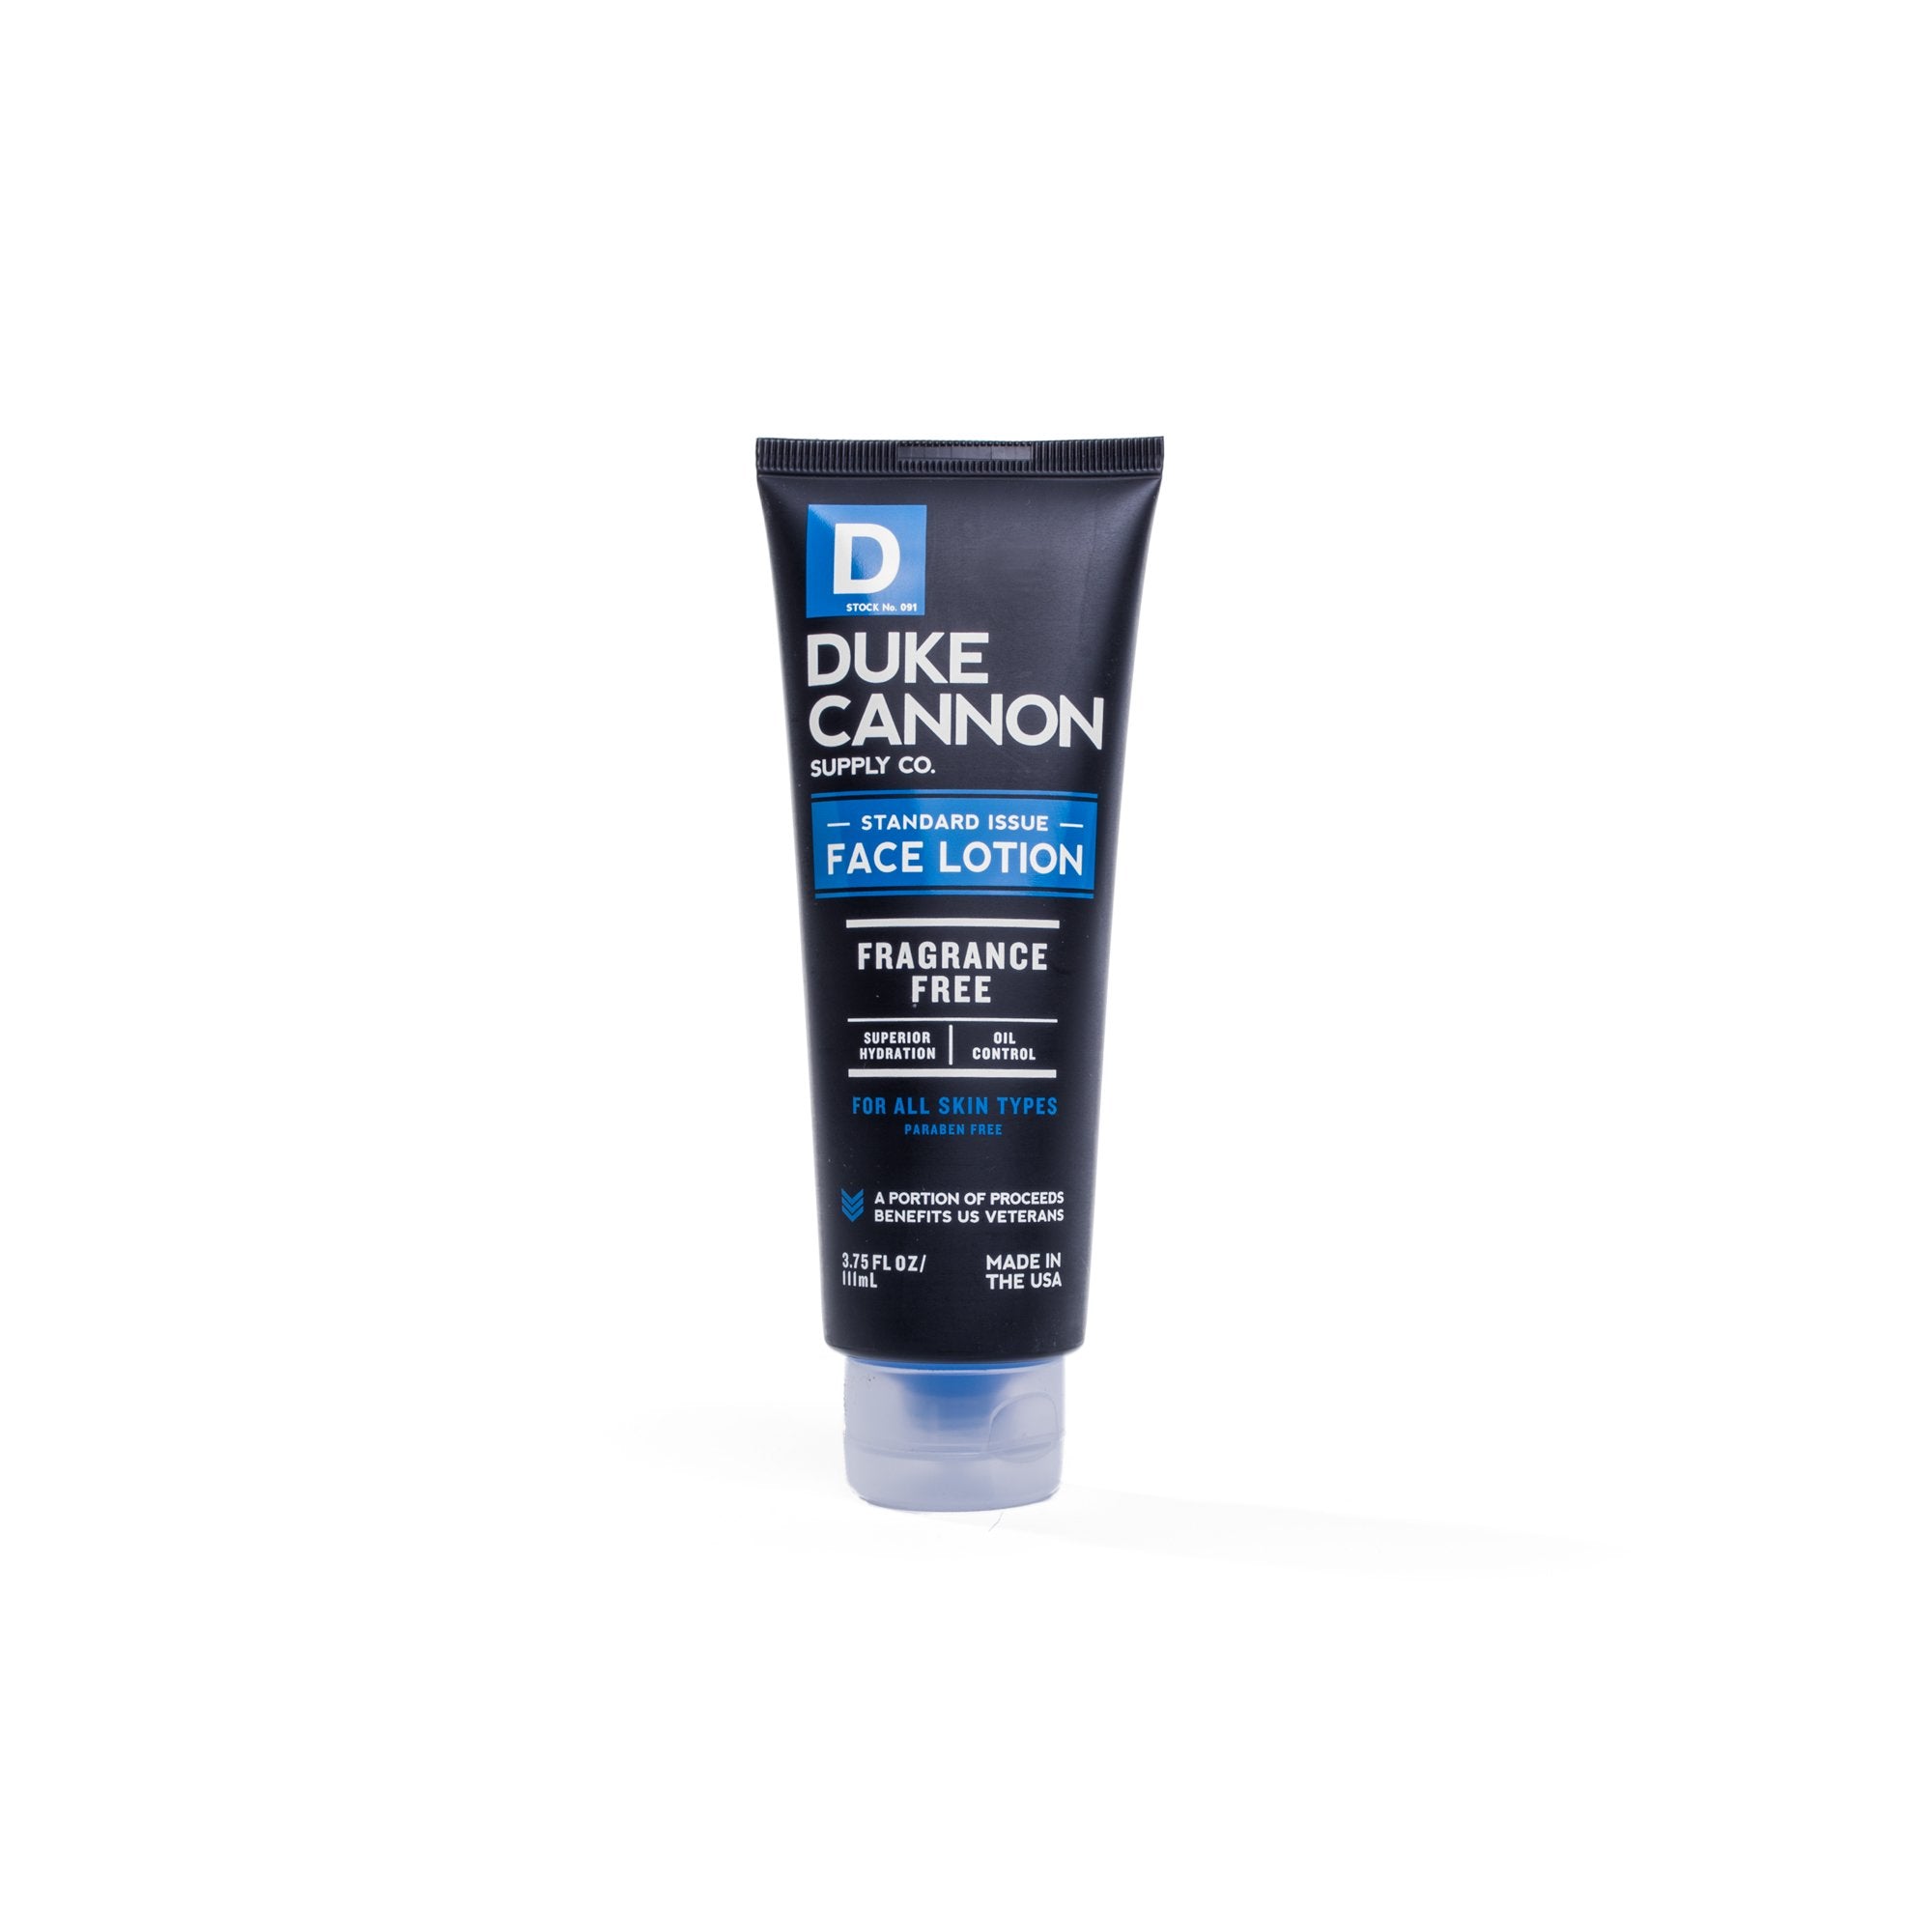 DUKE CANNON- Standard Issue Face Lotion